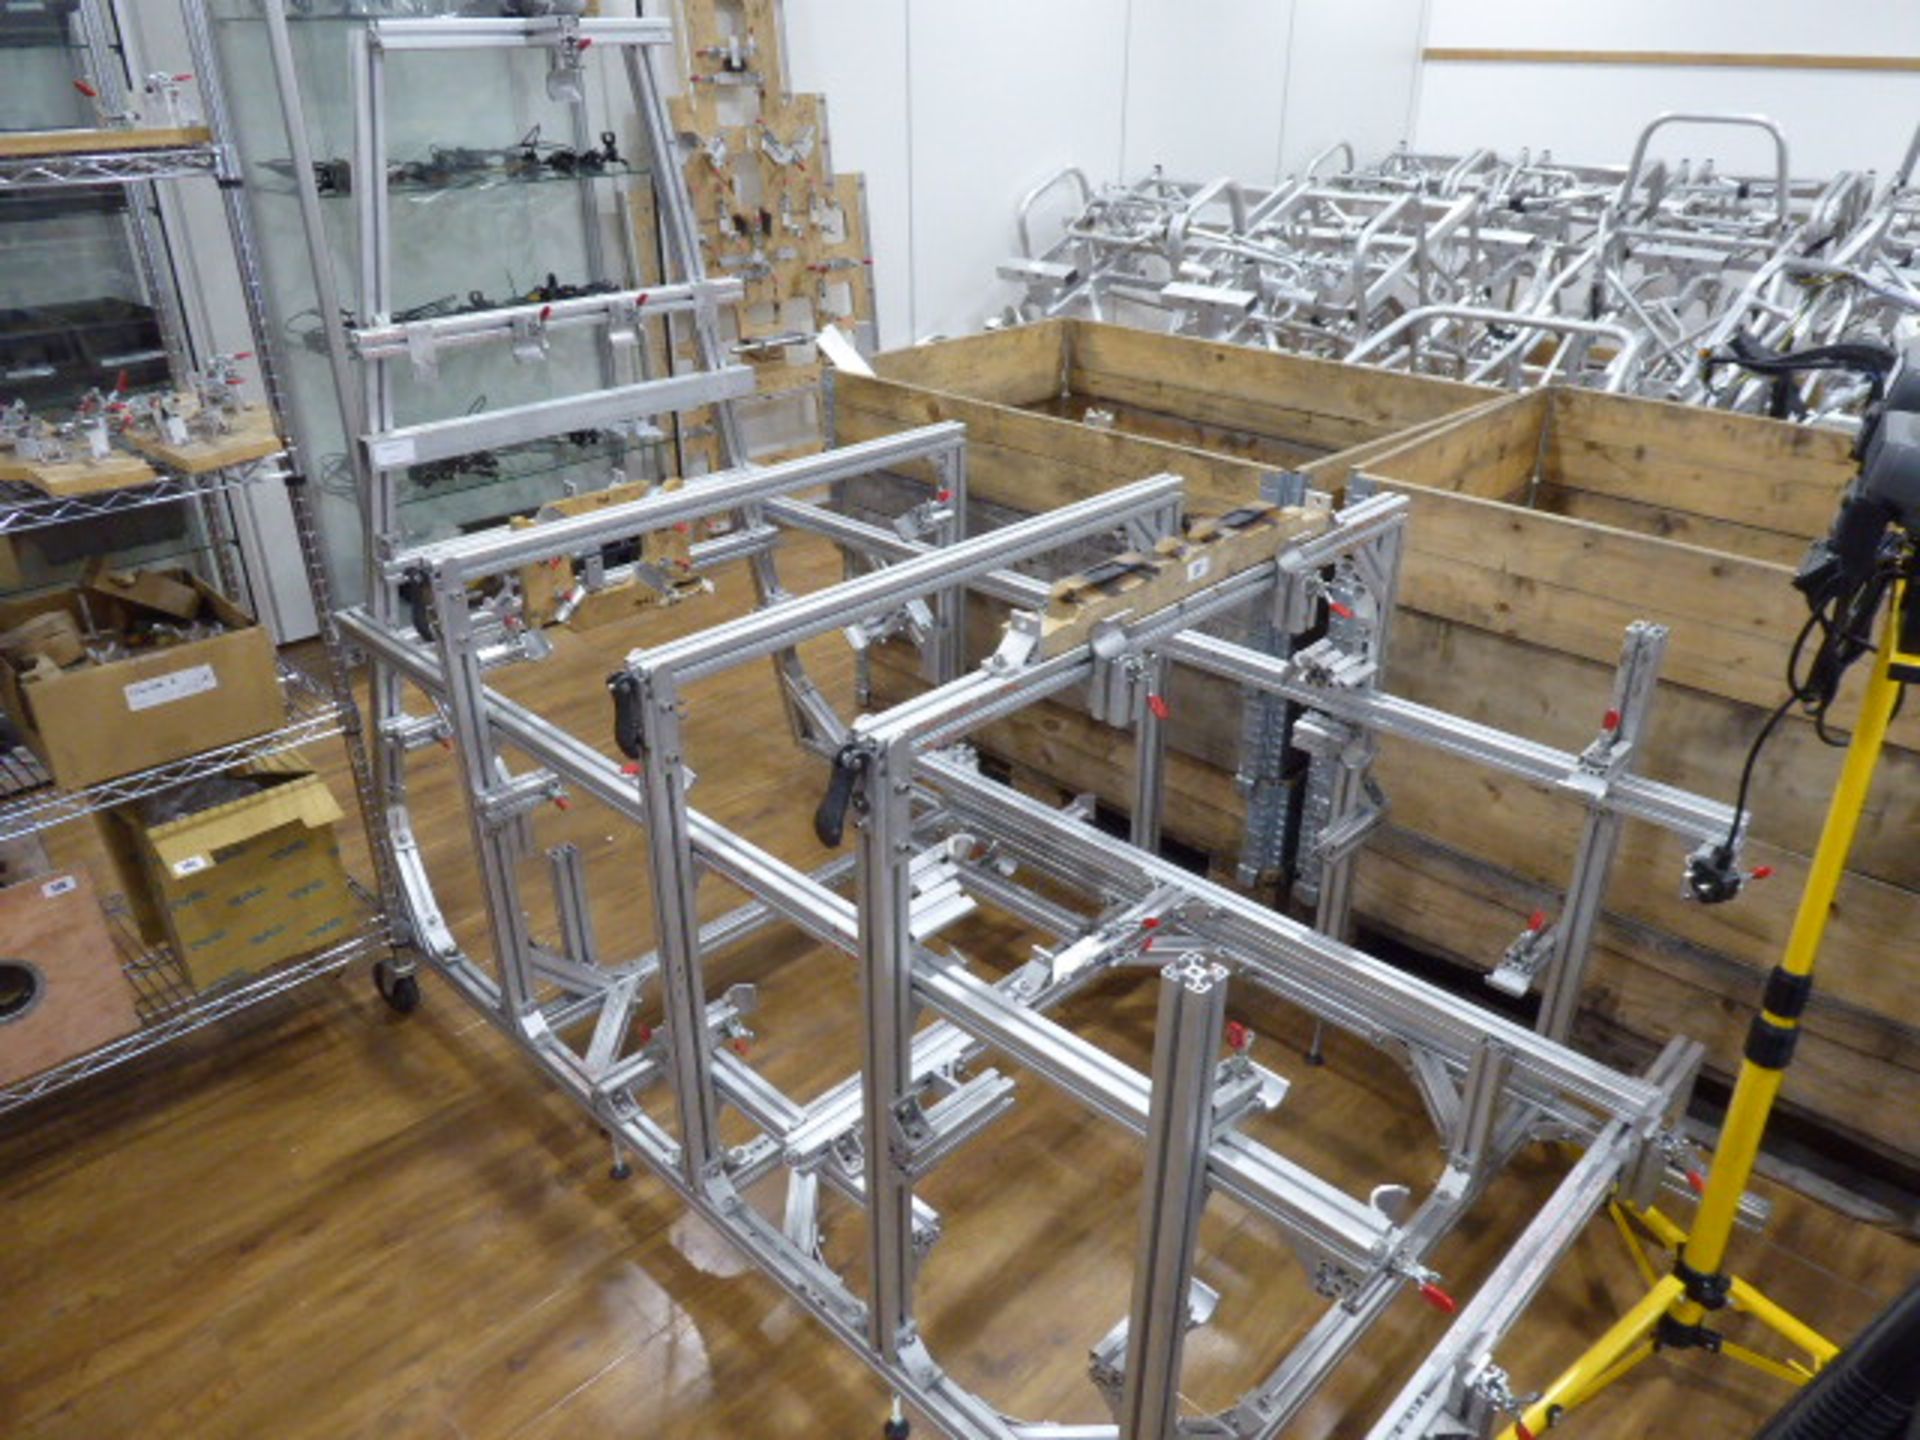 DryCycle aluminium frame engineering jig with additional jig, mounted on board, and 3 shelves of